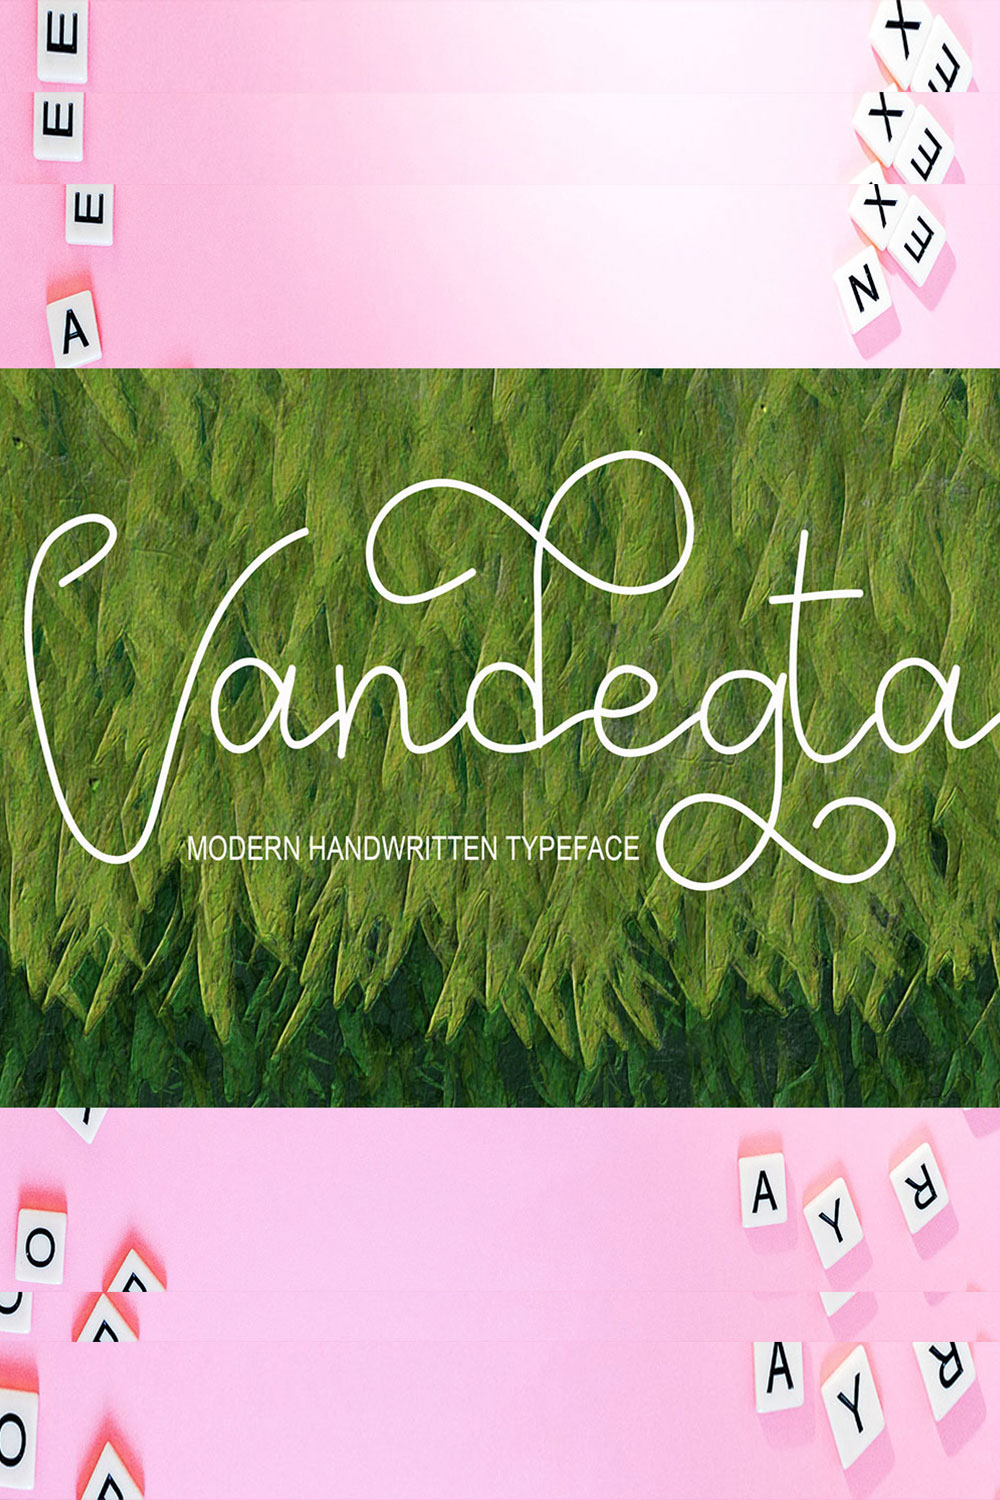 An image with text showing off the beautiful Vandegta font.